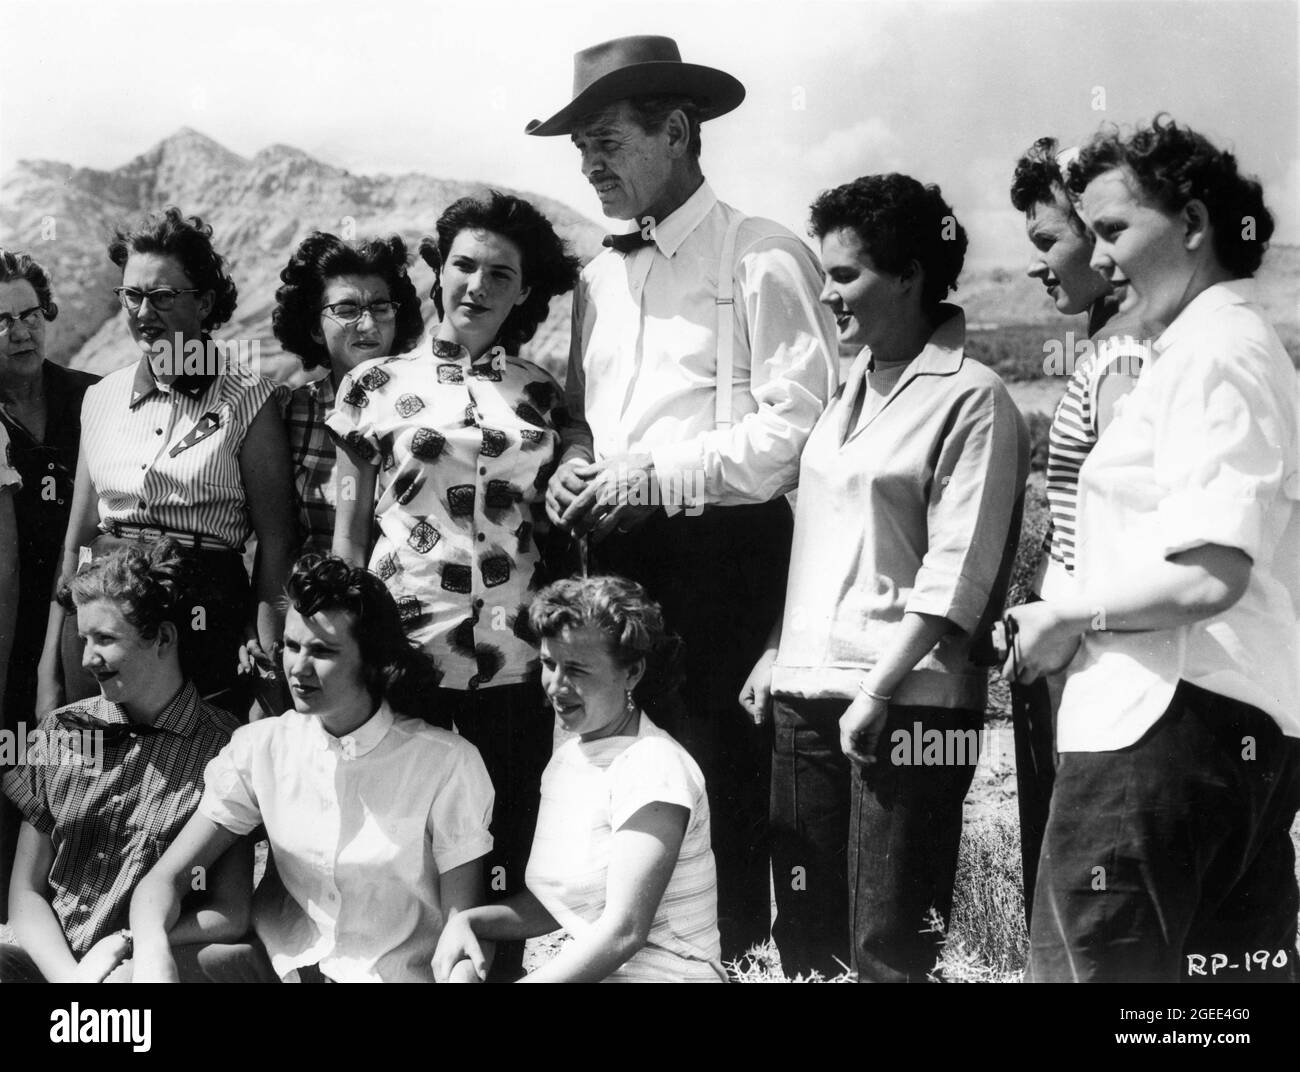 CLARK GABLE poses for a photo with Female Fans on set location candid during filming of THE KING AND FOUR QUEENS 1956 director RAOUL WALSH screenplay Richard Alan Simmons and Margaret Fitts music Alex North Gabco Productions / Russ-Field Productions / United Artists Stock Photo